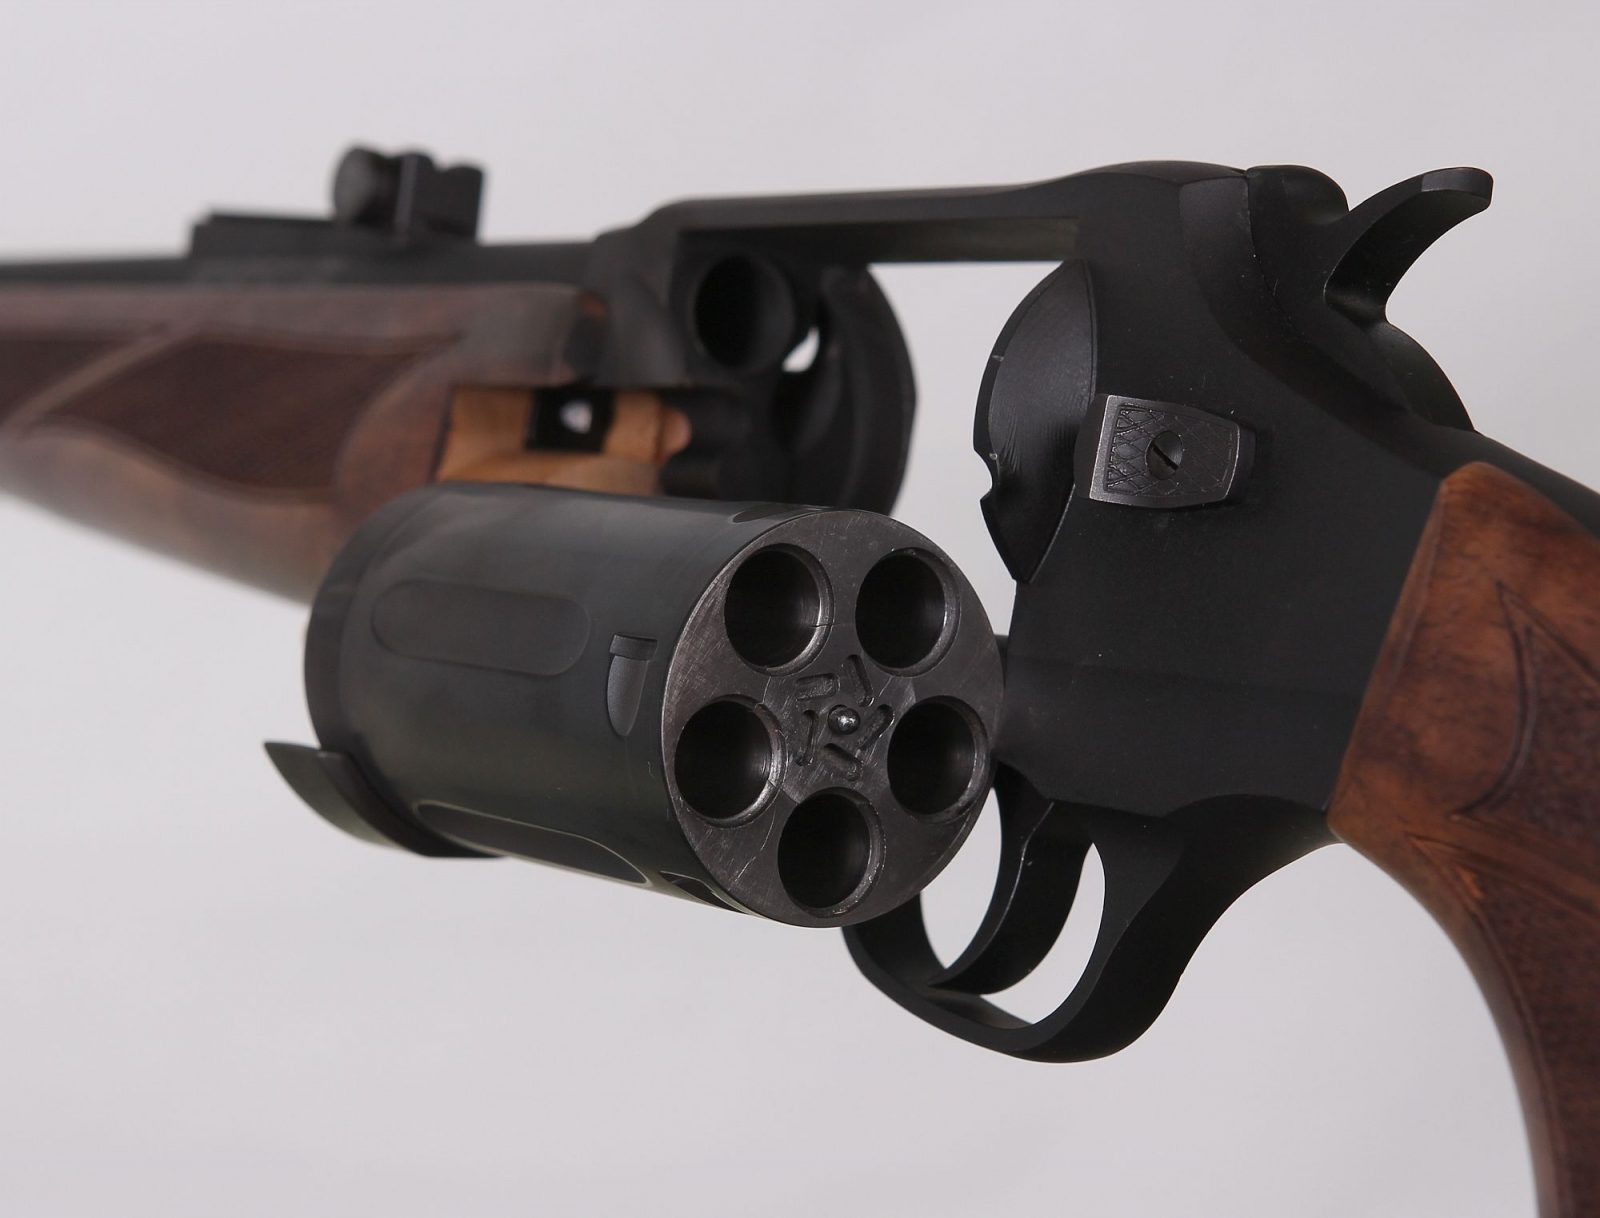 I think this shotgun is best suited as a compact gun for upland game and as...